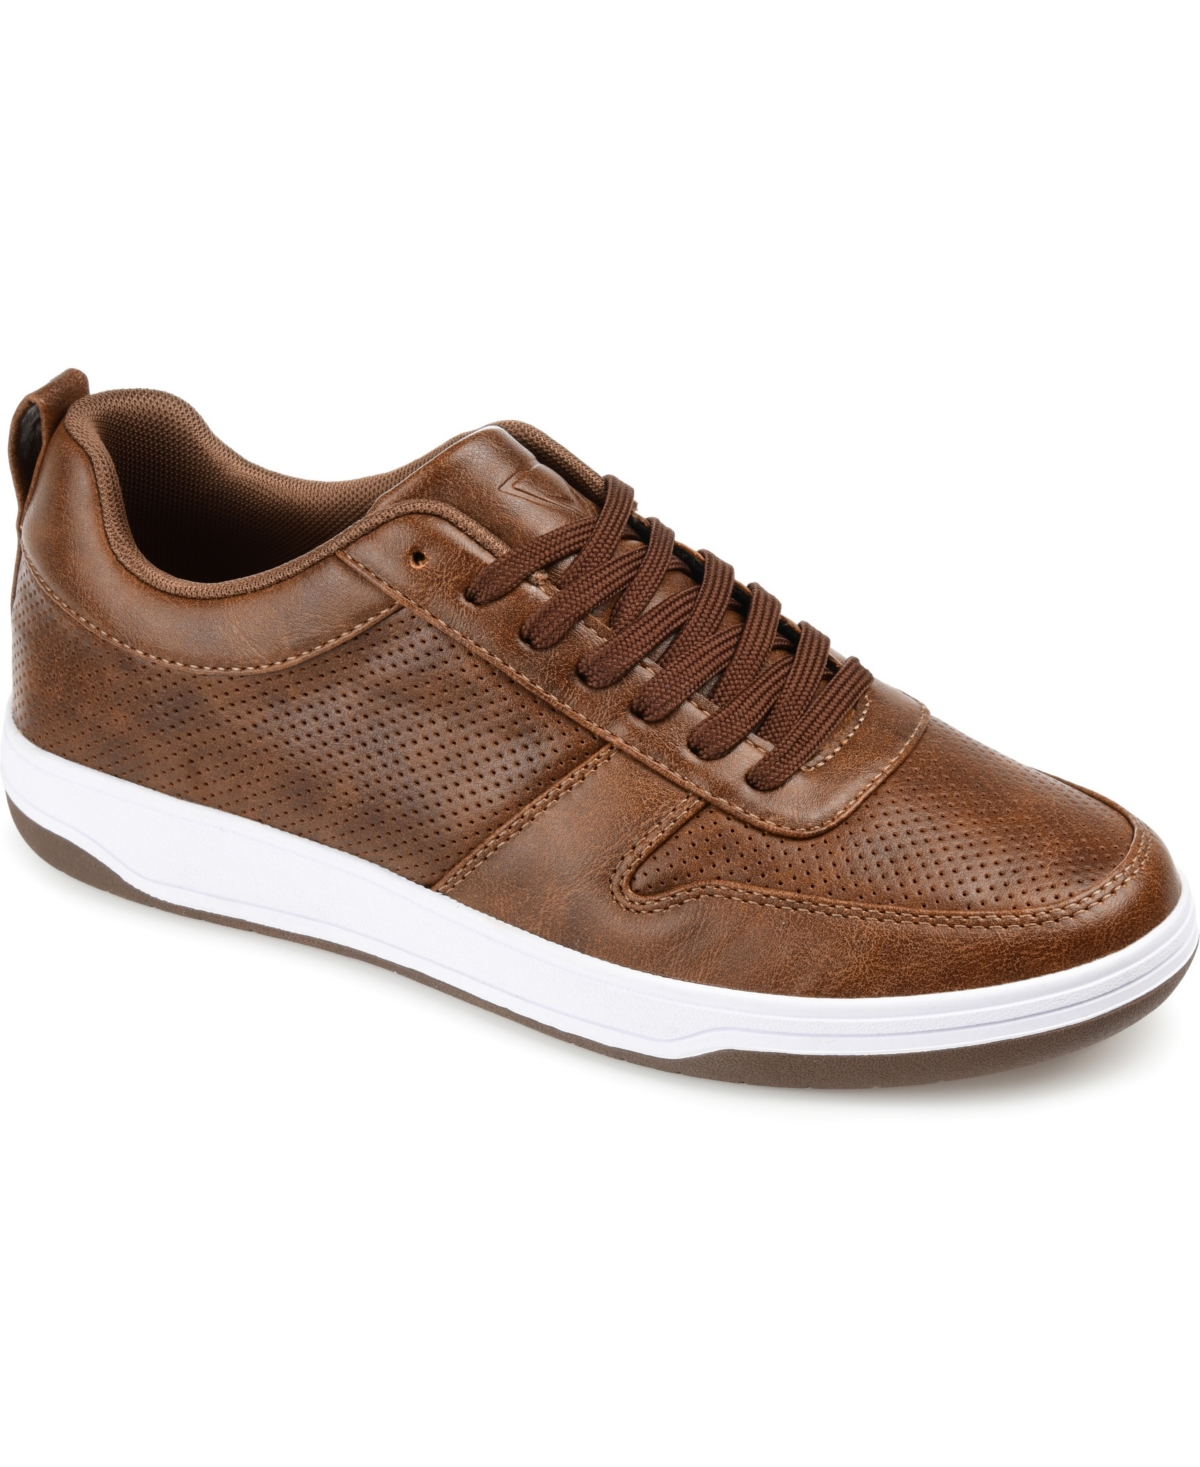 Men's Ryden Casual Perforated Sneakers - Brown